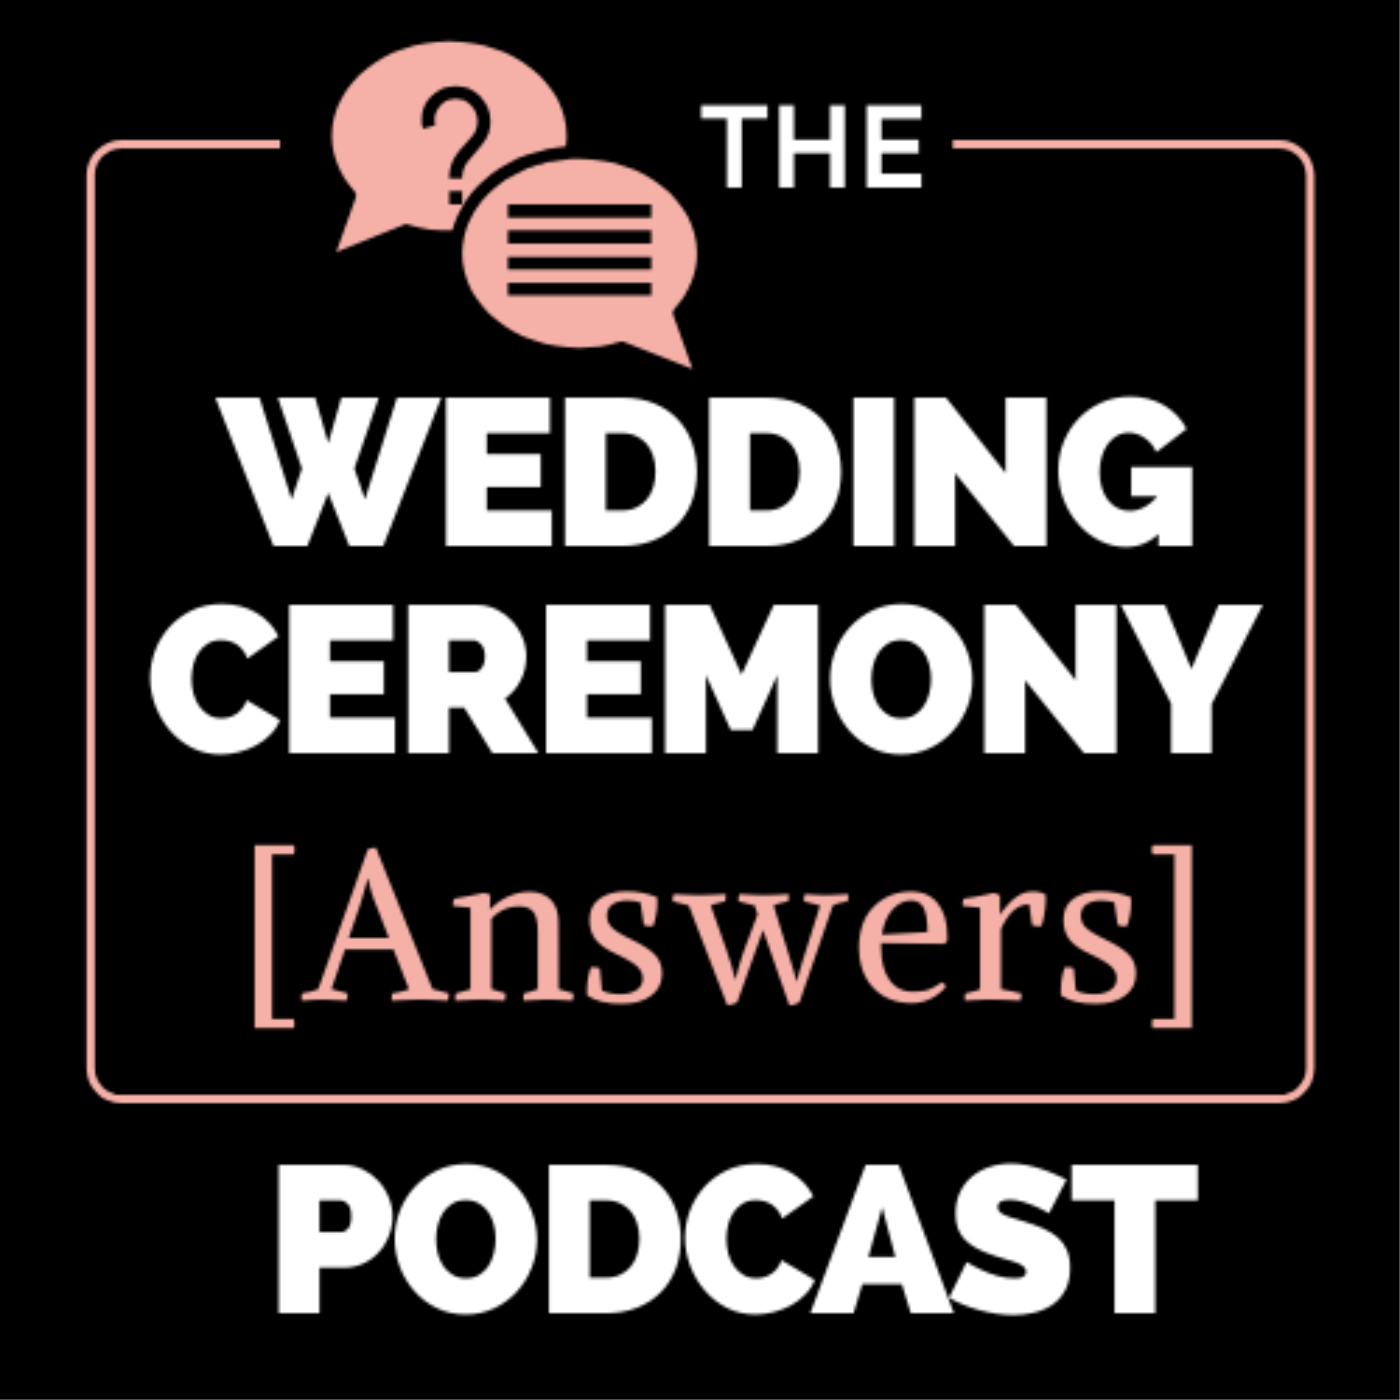 The Wedding Ceremony Answers Podcast podcast show image